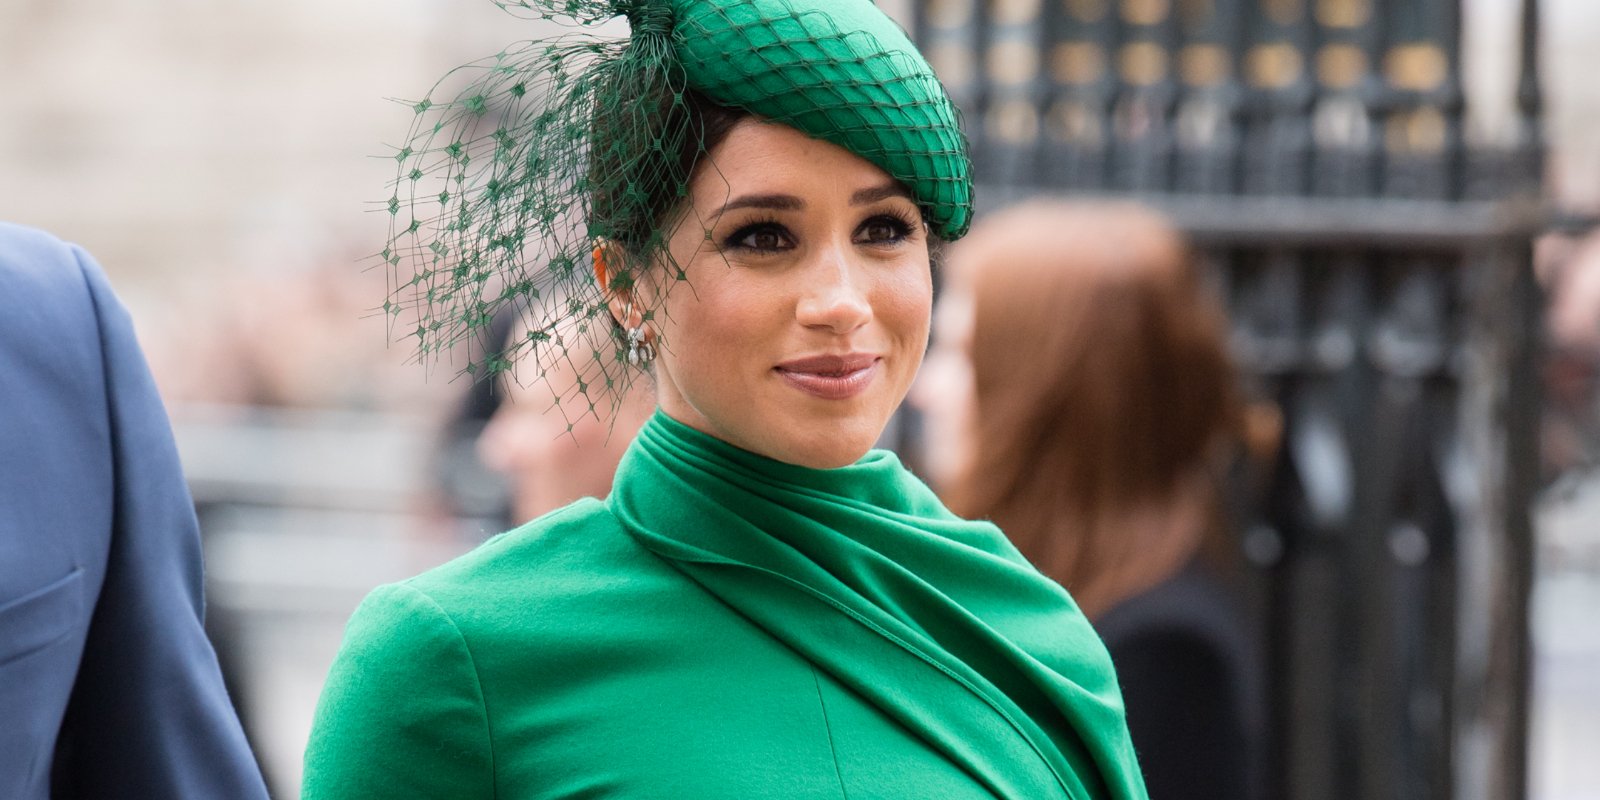 Meghan Markle wears a green ensemble to a royal family event in 2020.